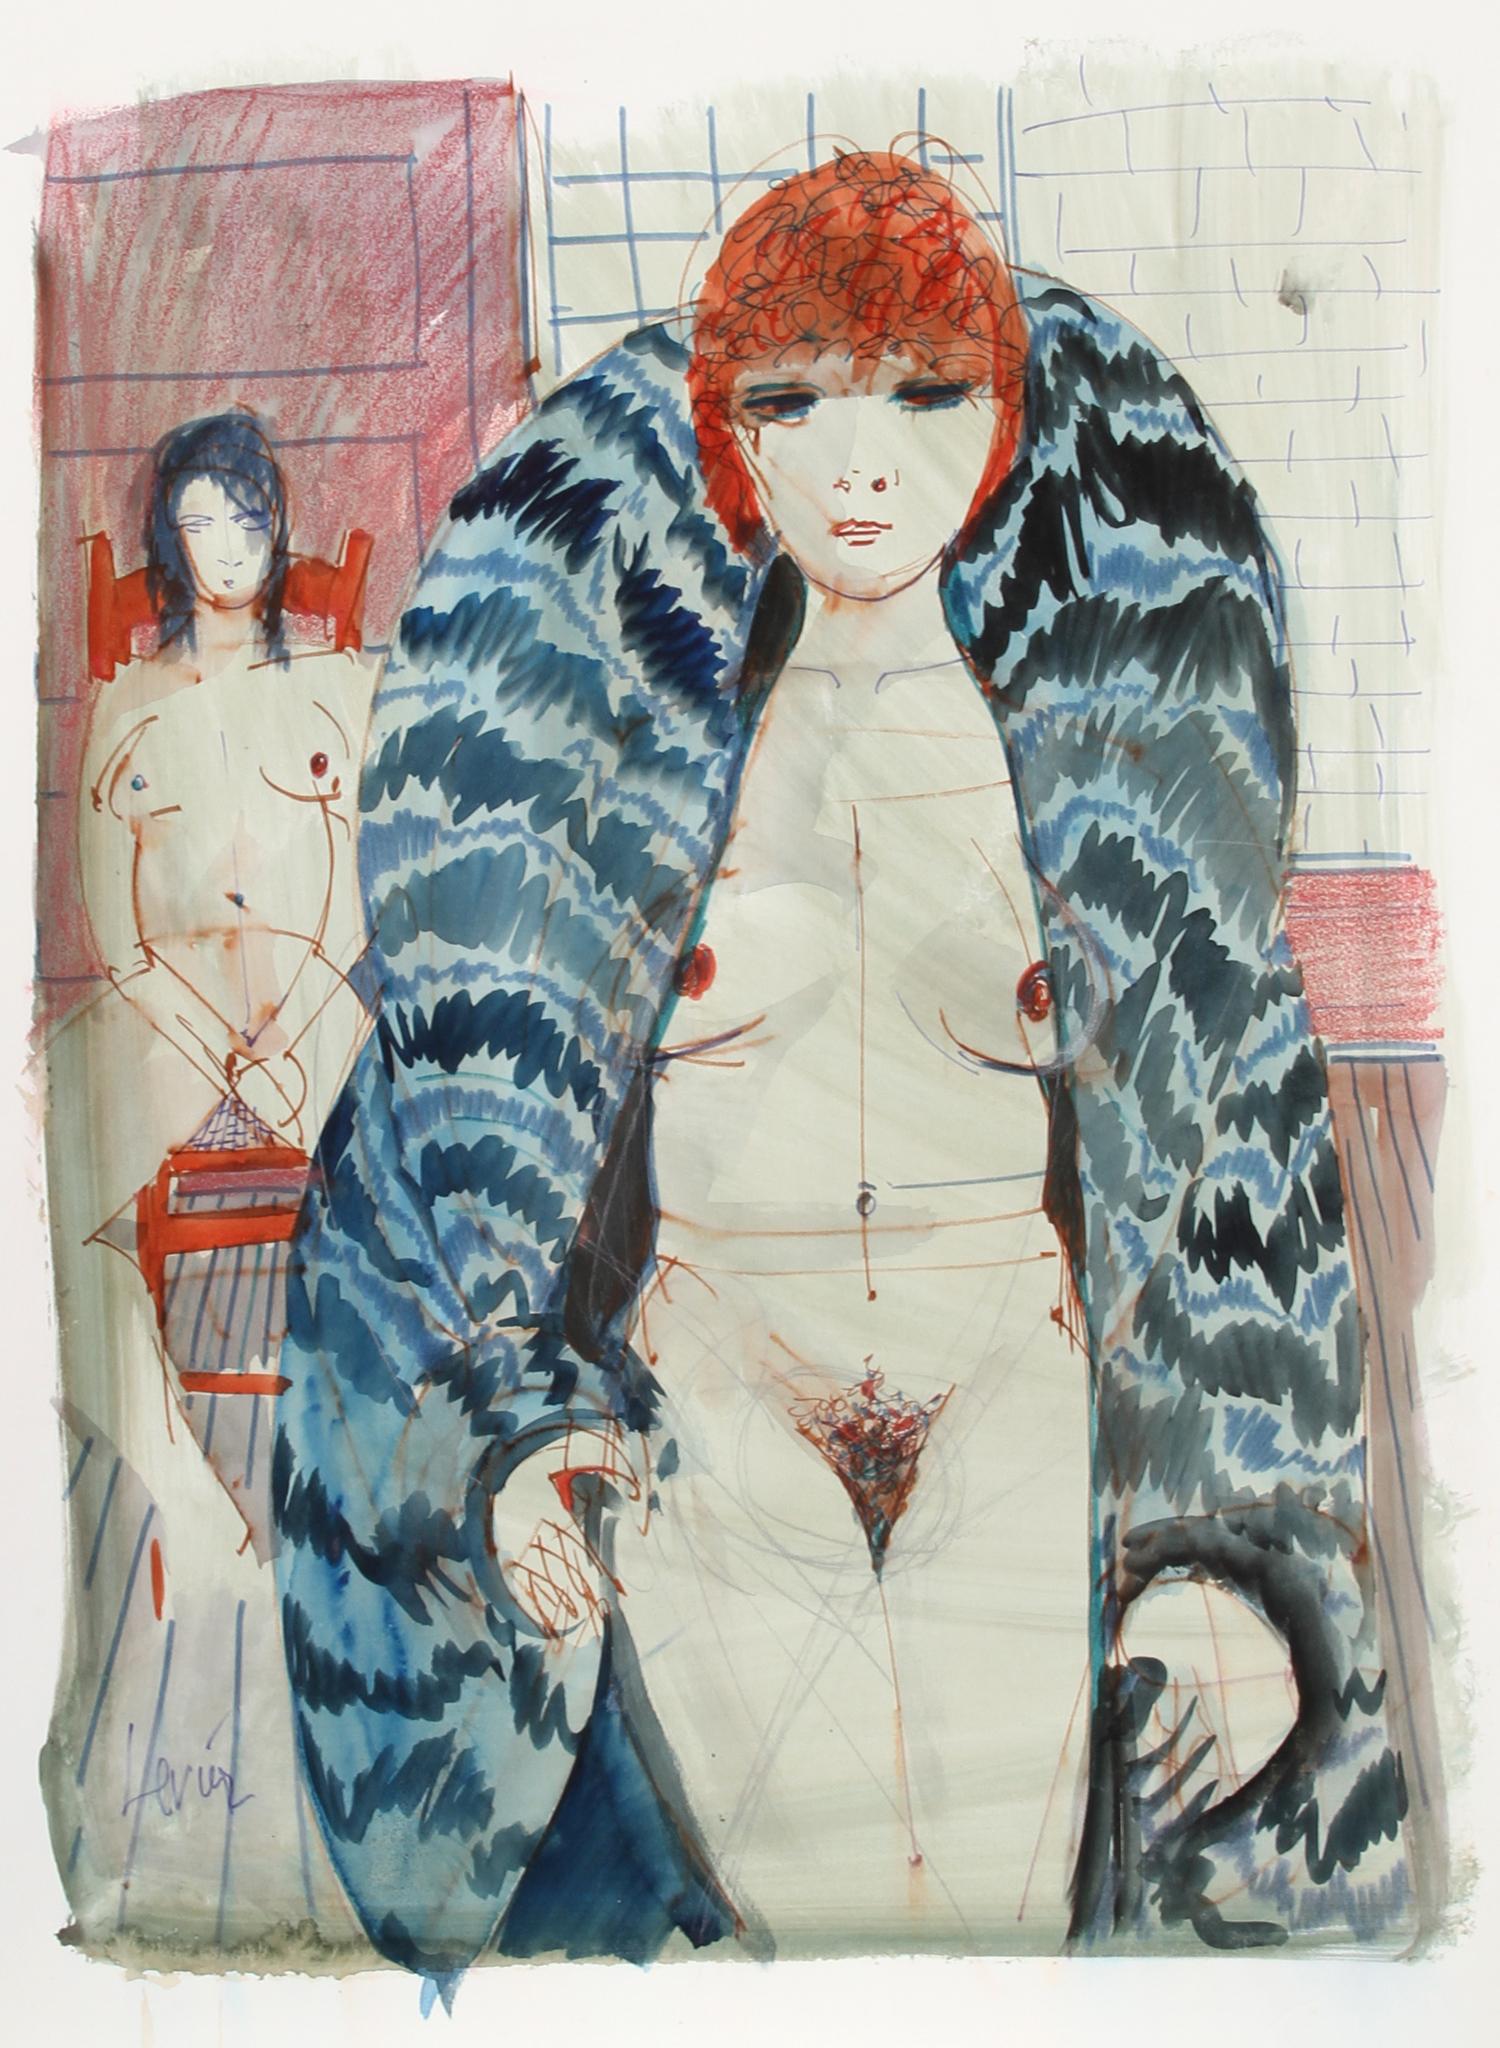 Artist: Charles Levier, French (1920 - 2003)
Title: Nudes in Fur II 
Year: circa 1970
Medium: Watercolor on Paper, signed
Image Size: 22 x 16.5 inches
Size: 28.5 in. x 22 in. (72.39 cm x 55.88 cm)